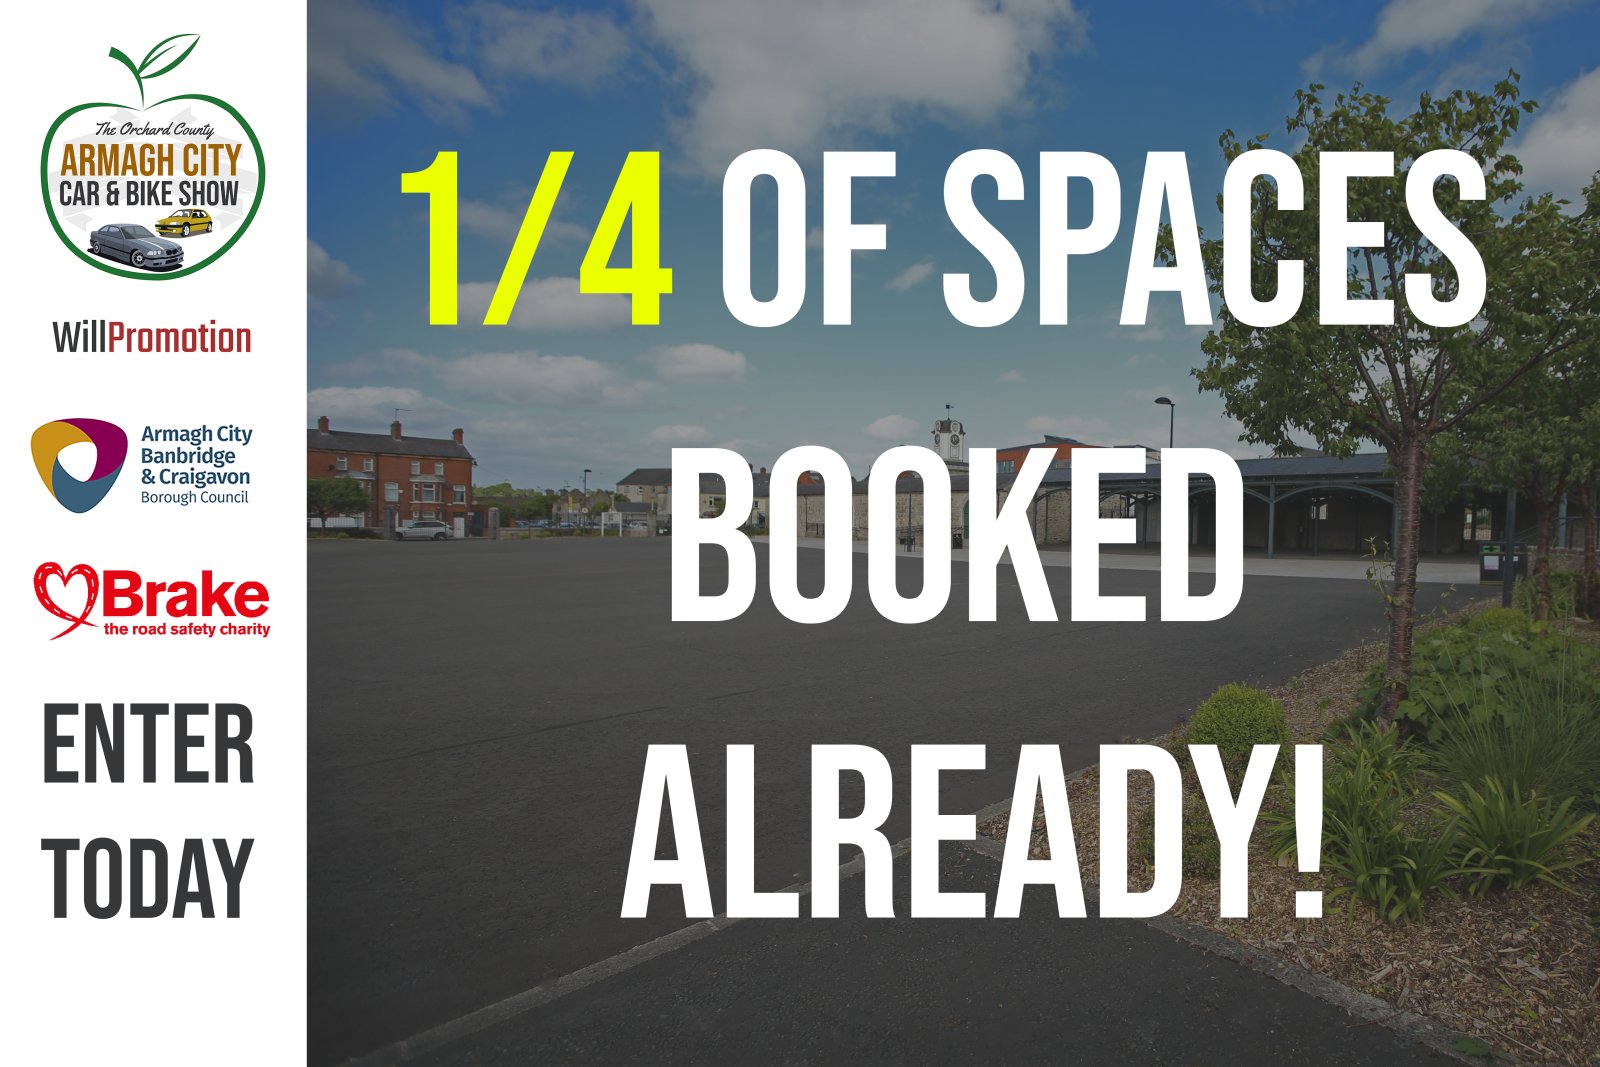 1 4 of spaces booked.jpg